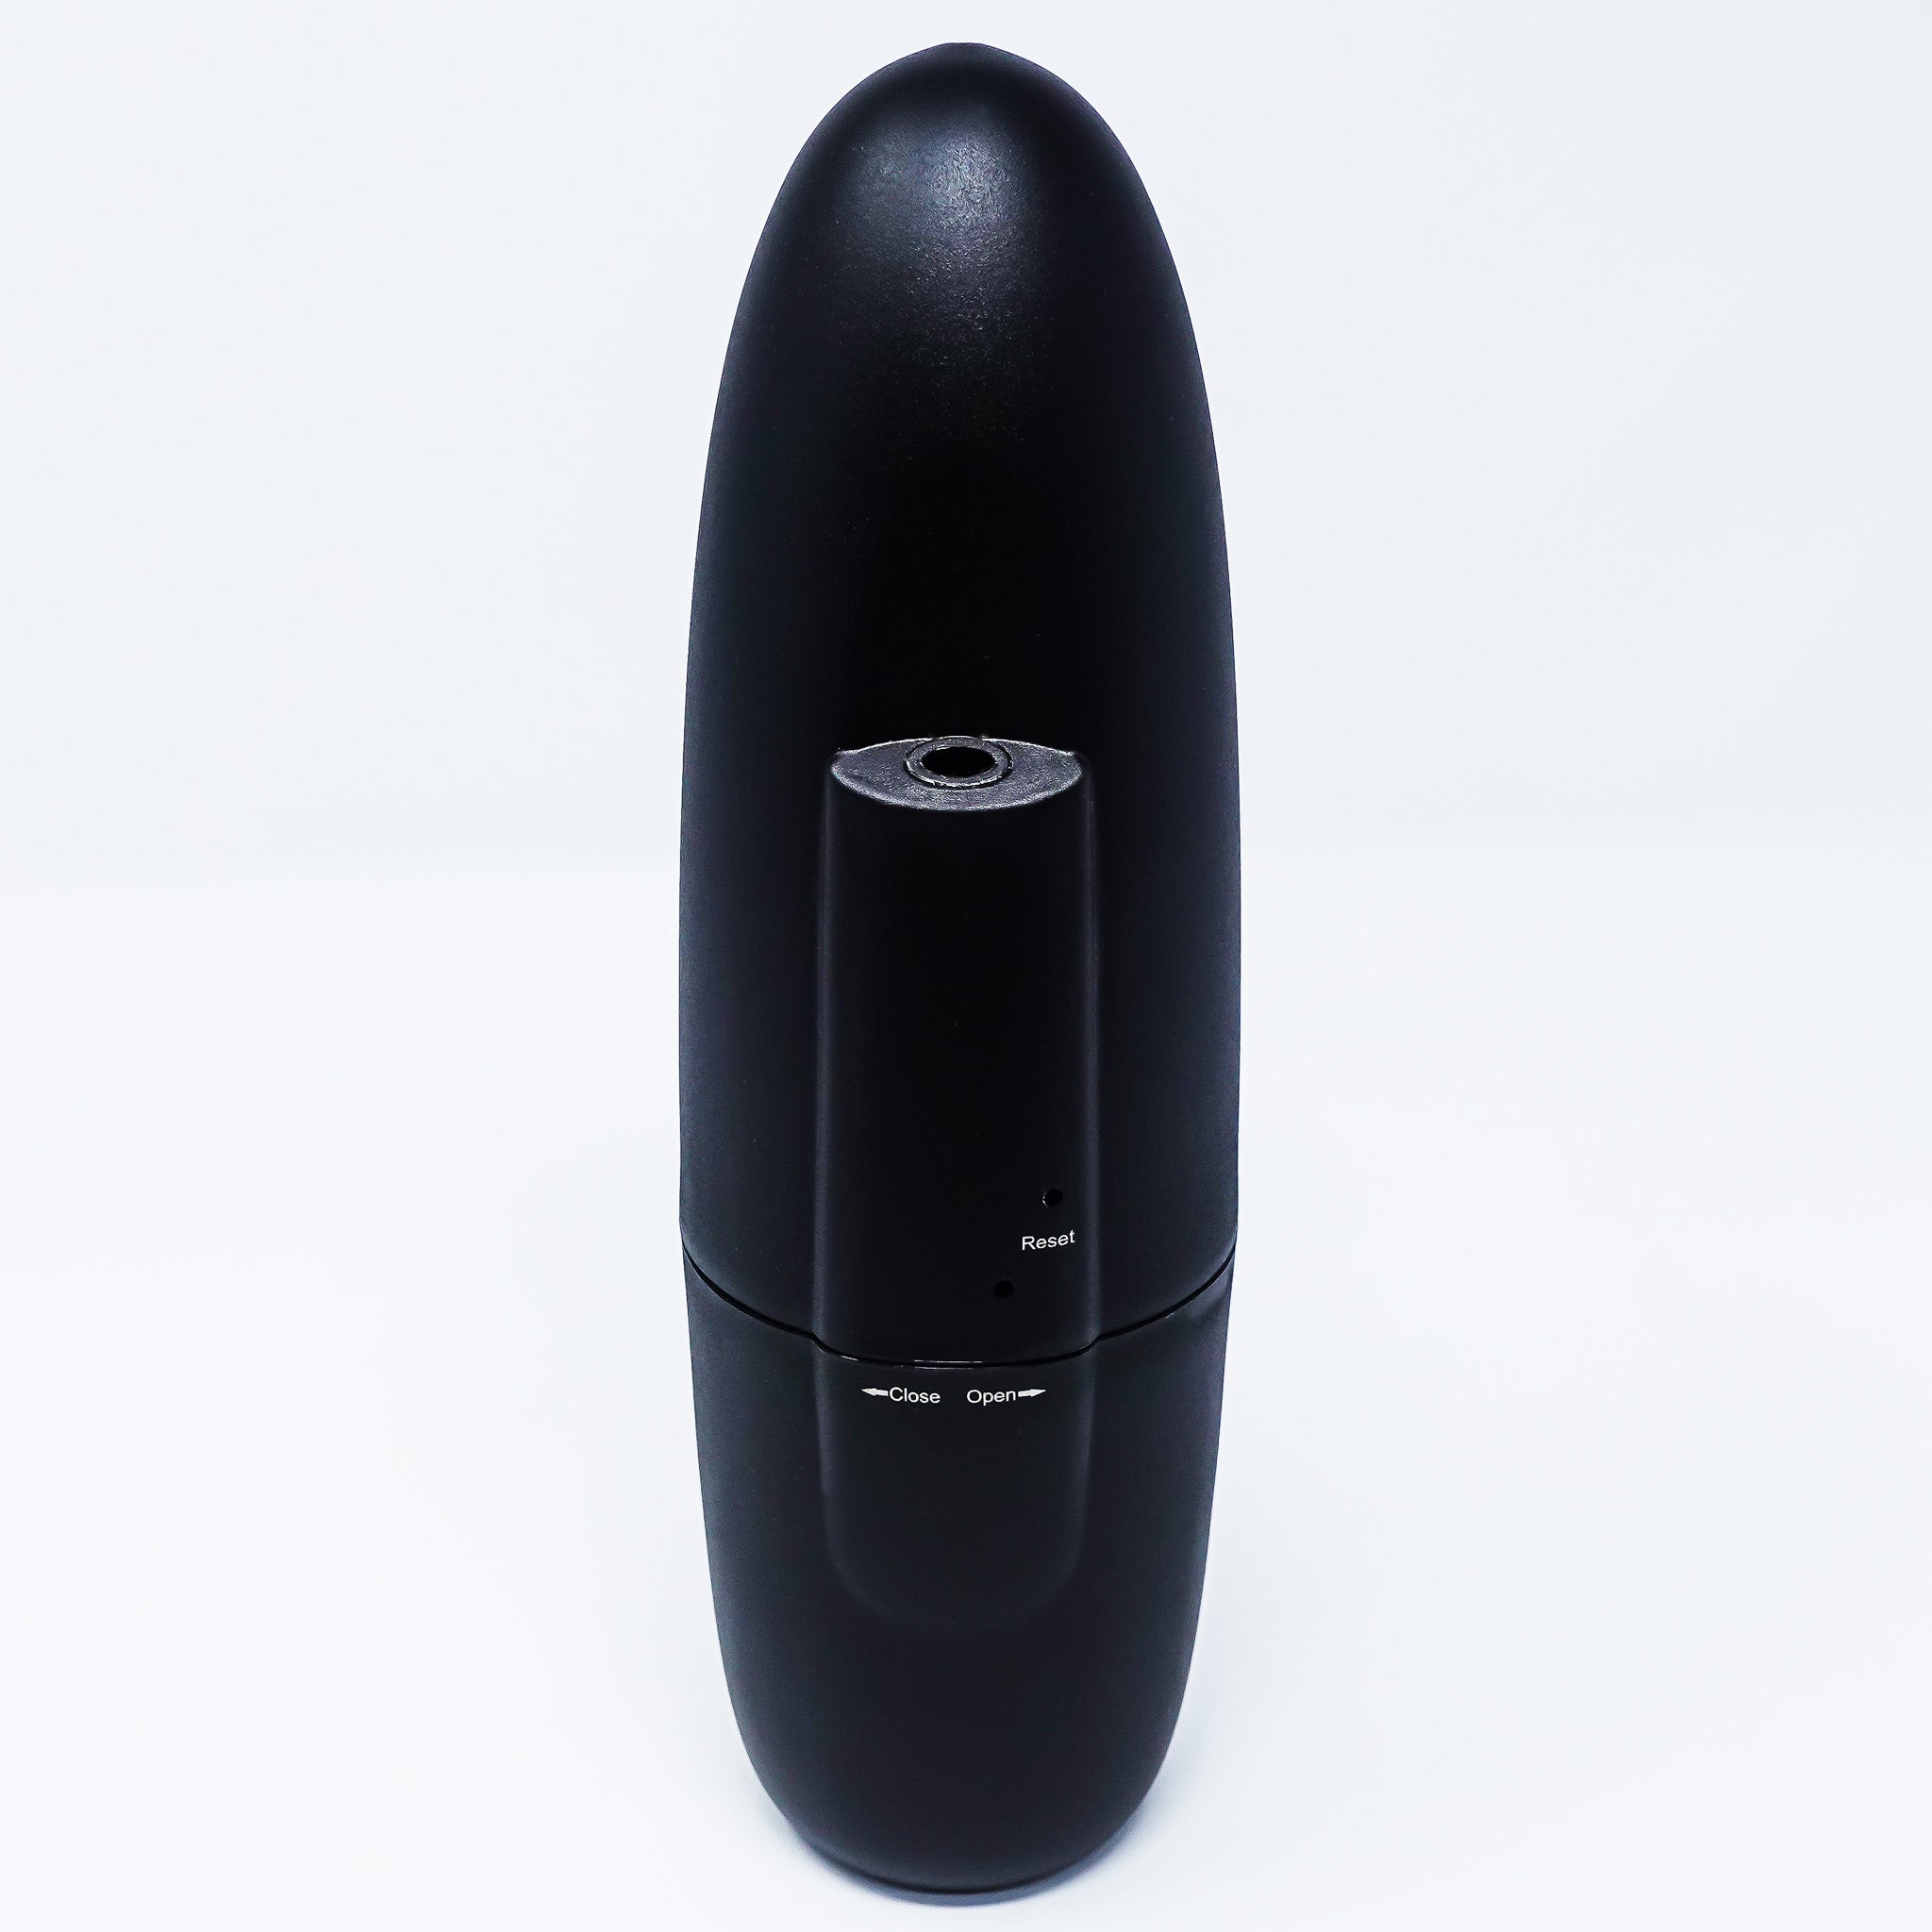 Plug-In Waterless Fragrance Oil Diffuser with Bluetooth App Control